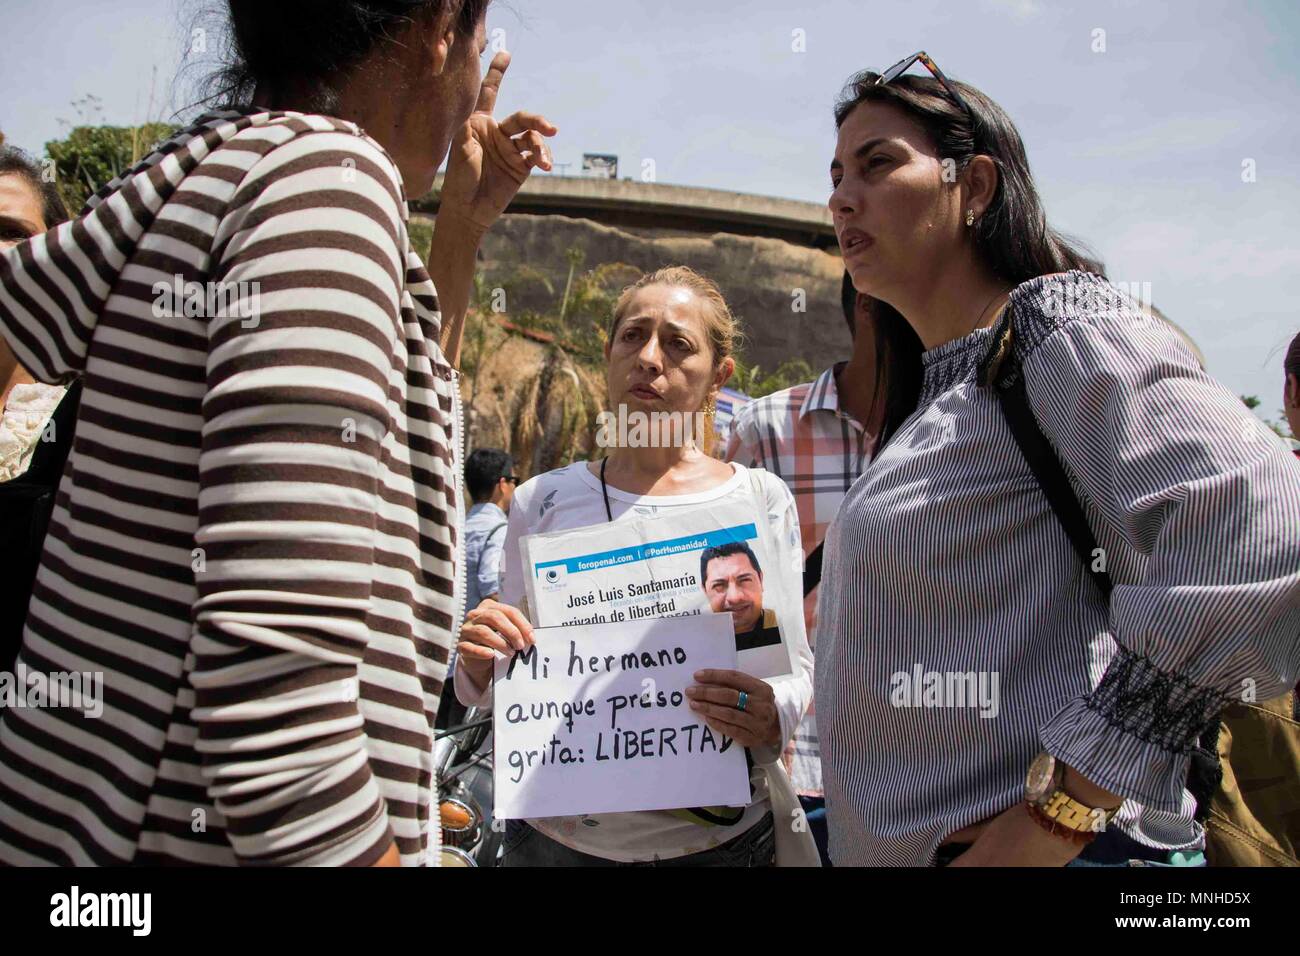 17 May 2018, Venezuela, Caracas: 'My brother shouts: Freedom' is written on a banner held by Monica Santamaria, sister of detained Jose Luis Santamaria. A group of detained politicians of the opposition claim to have been attacked by the secret police (Bolivarian Intelligence Service, short SEBIN). Relatives waited in front of the prison demanding information. Venezuela is electing a new president on 20 May 2018. Maduro aims to affirm his presidency. Photo: Rayner Pena/dpa Stock Photo